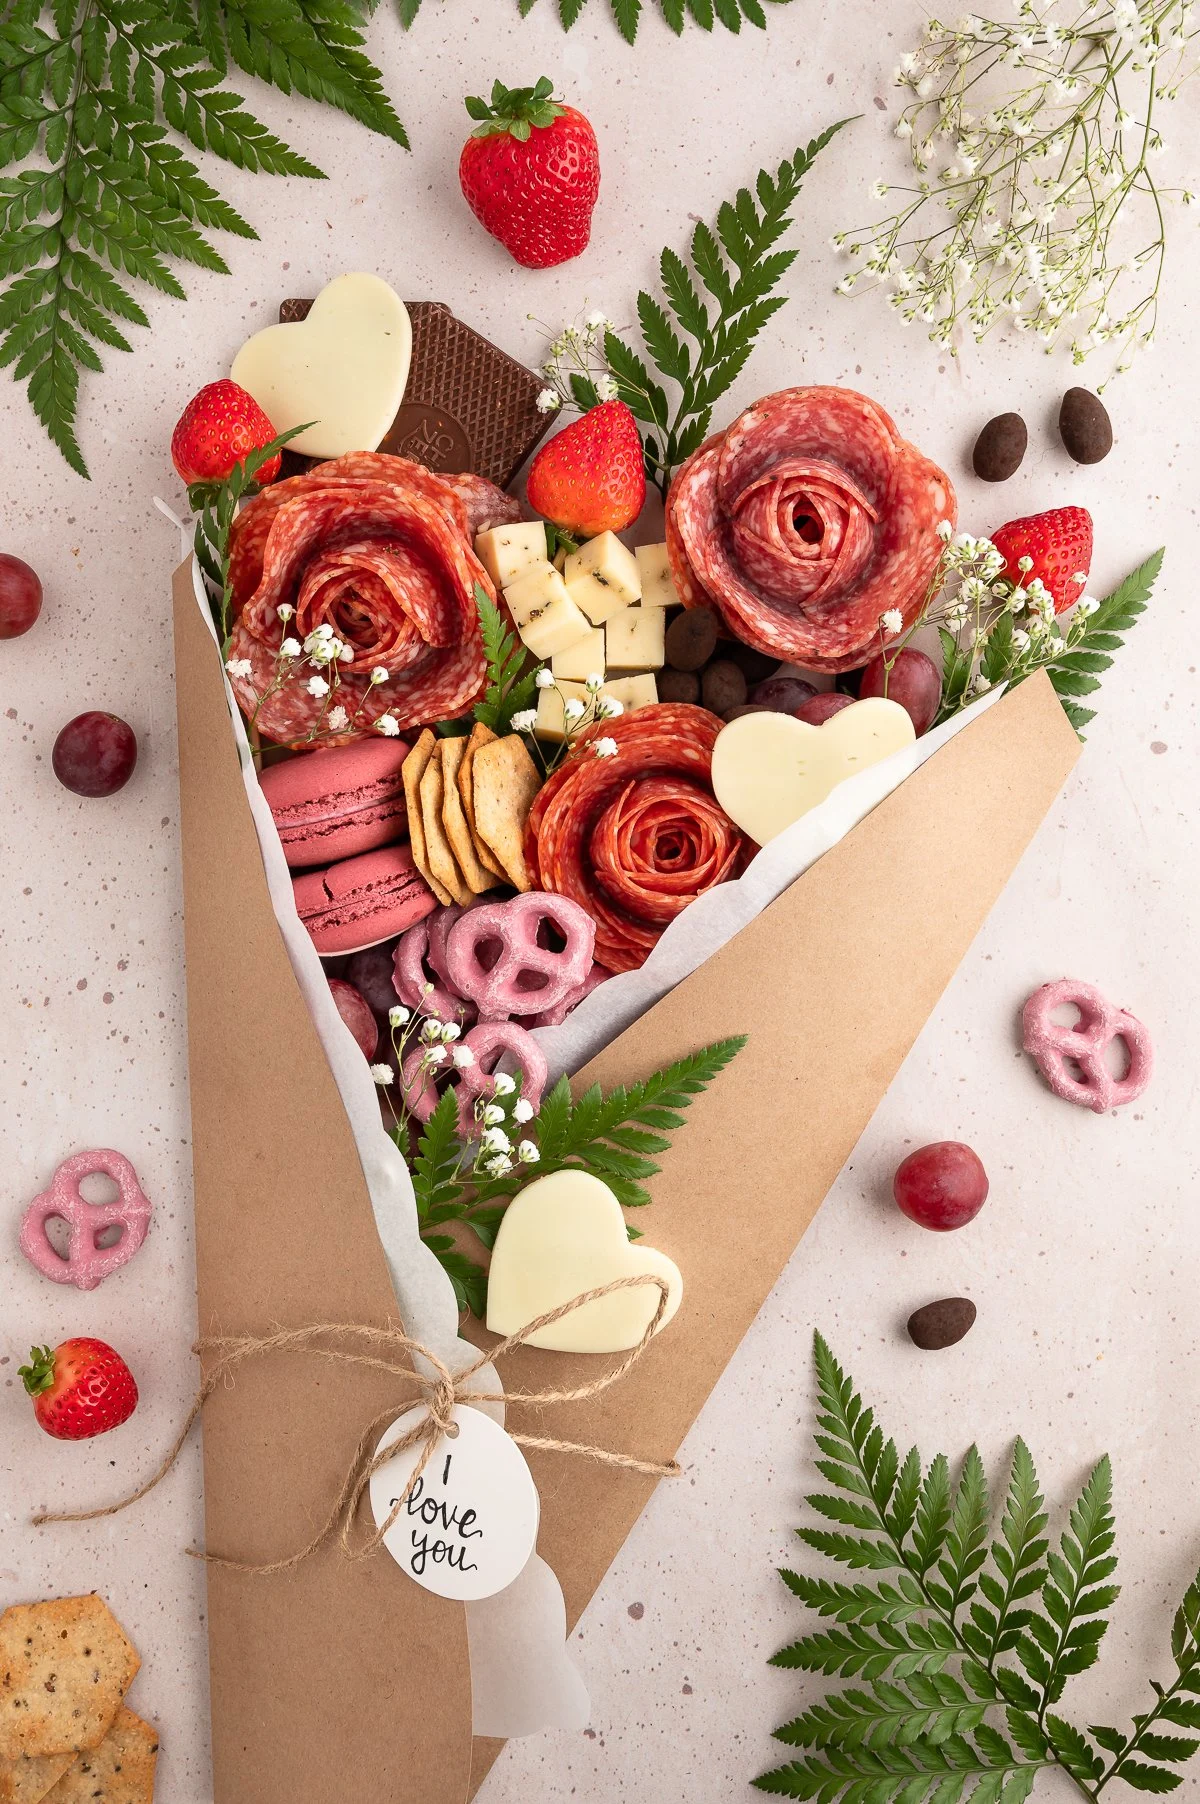 gorgeous charcuterie bouquet made with floral supplies, meats, cheeses and desserts